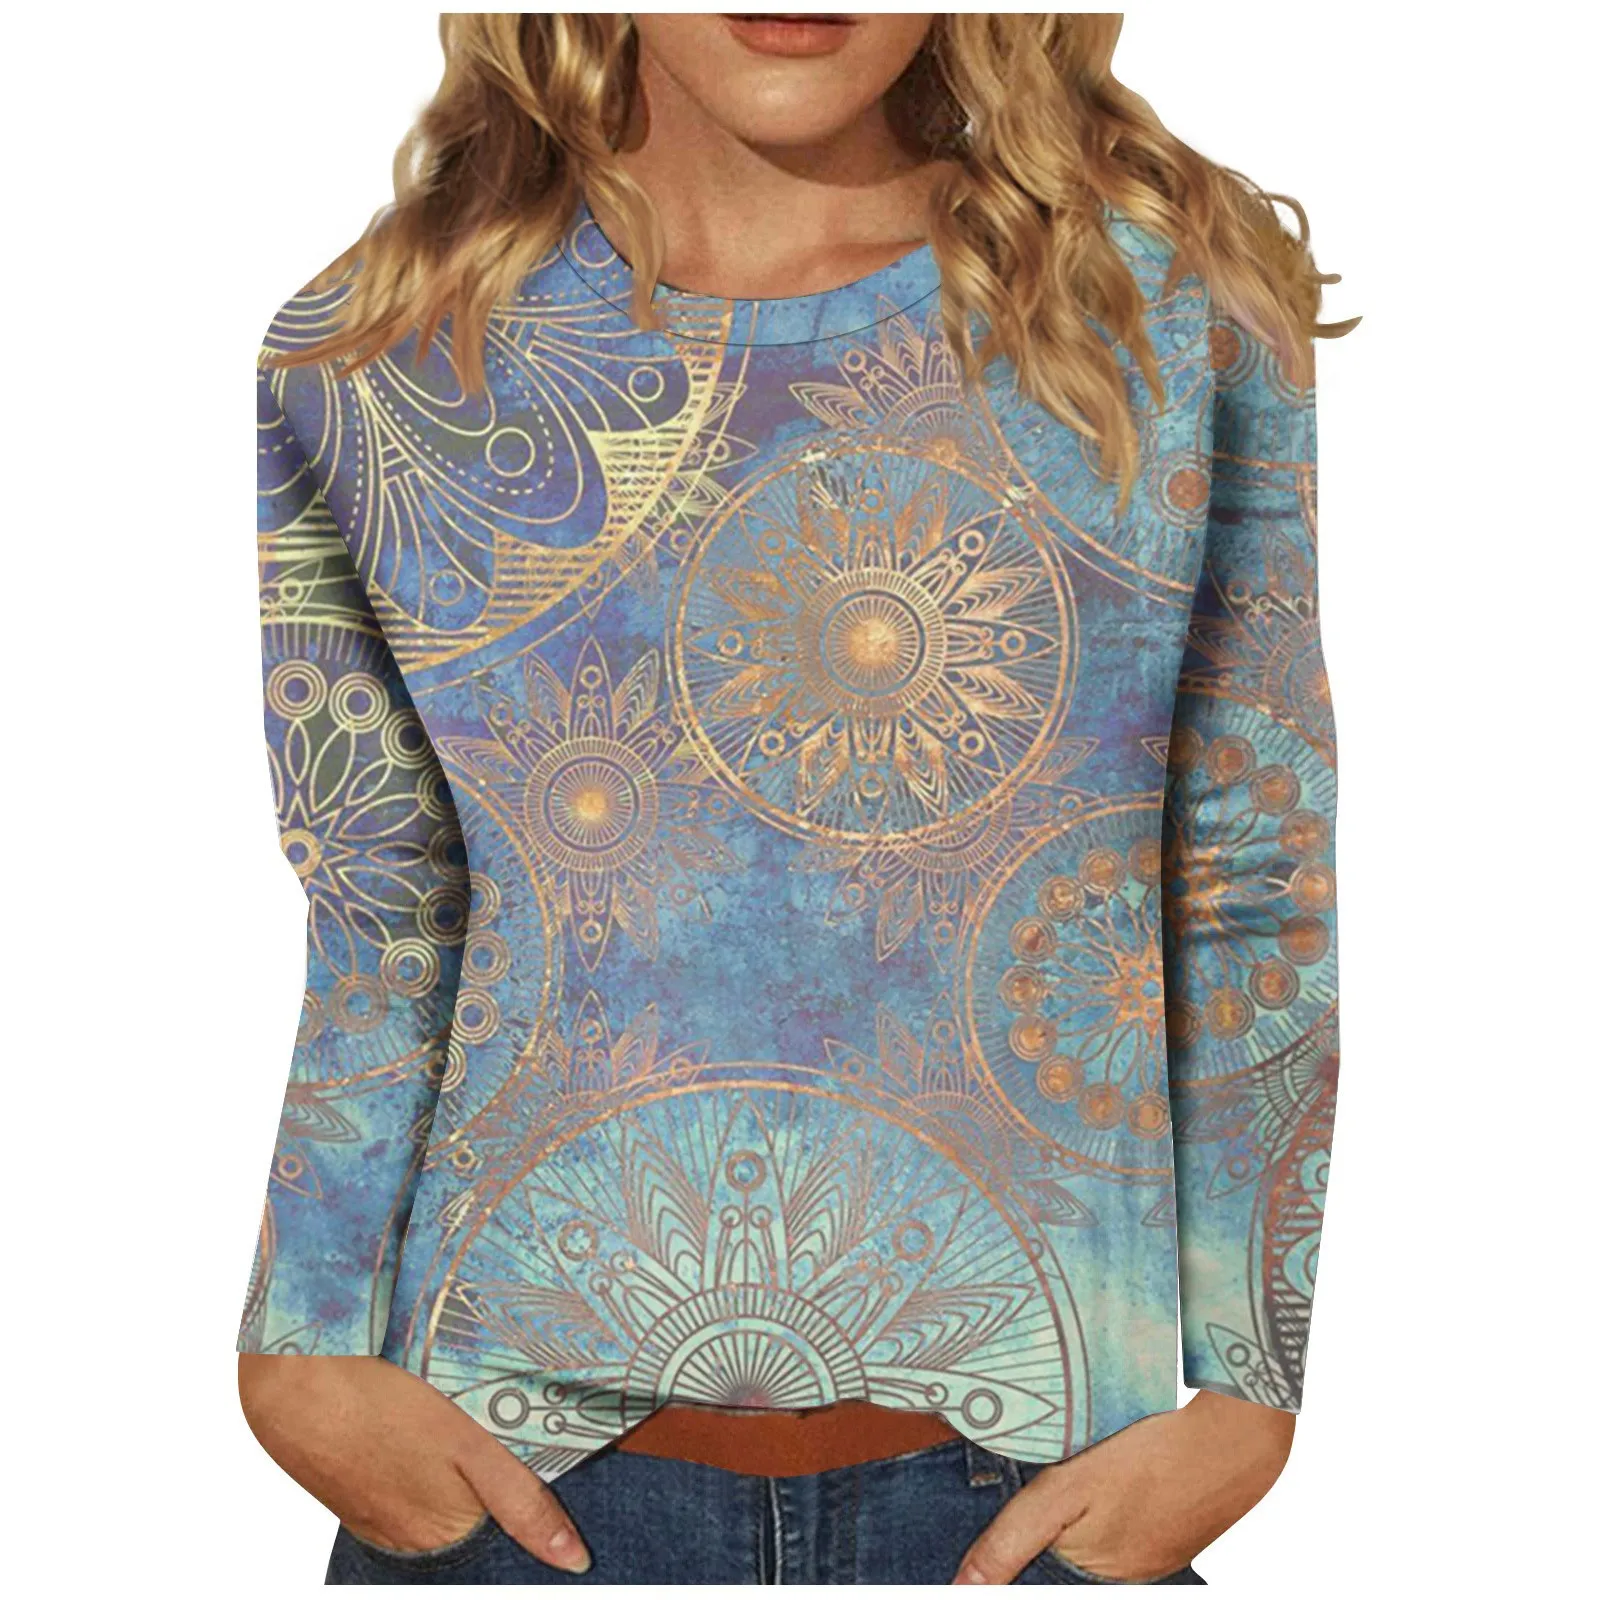 

Long Sleeve Shirts For Women Cute Print Graphic Tees Blouses Casual Plus Size Basic Tops Pullover Tops Casuales лонгслив женский